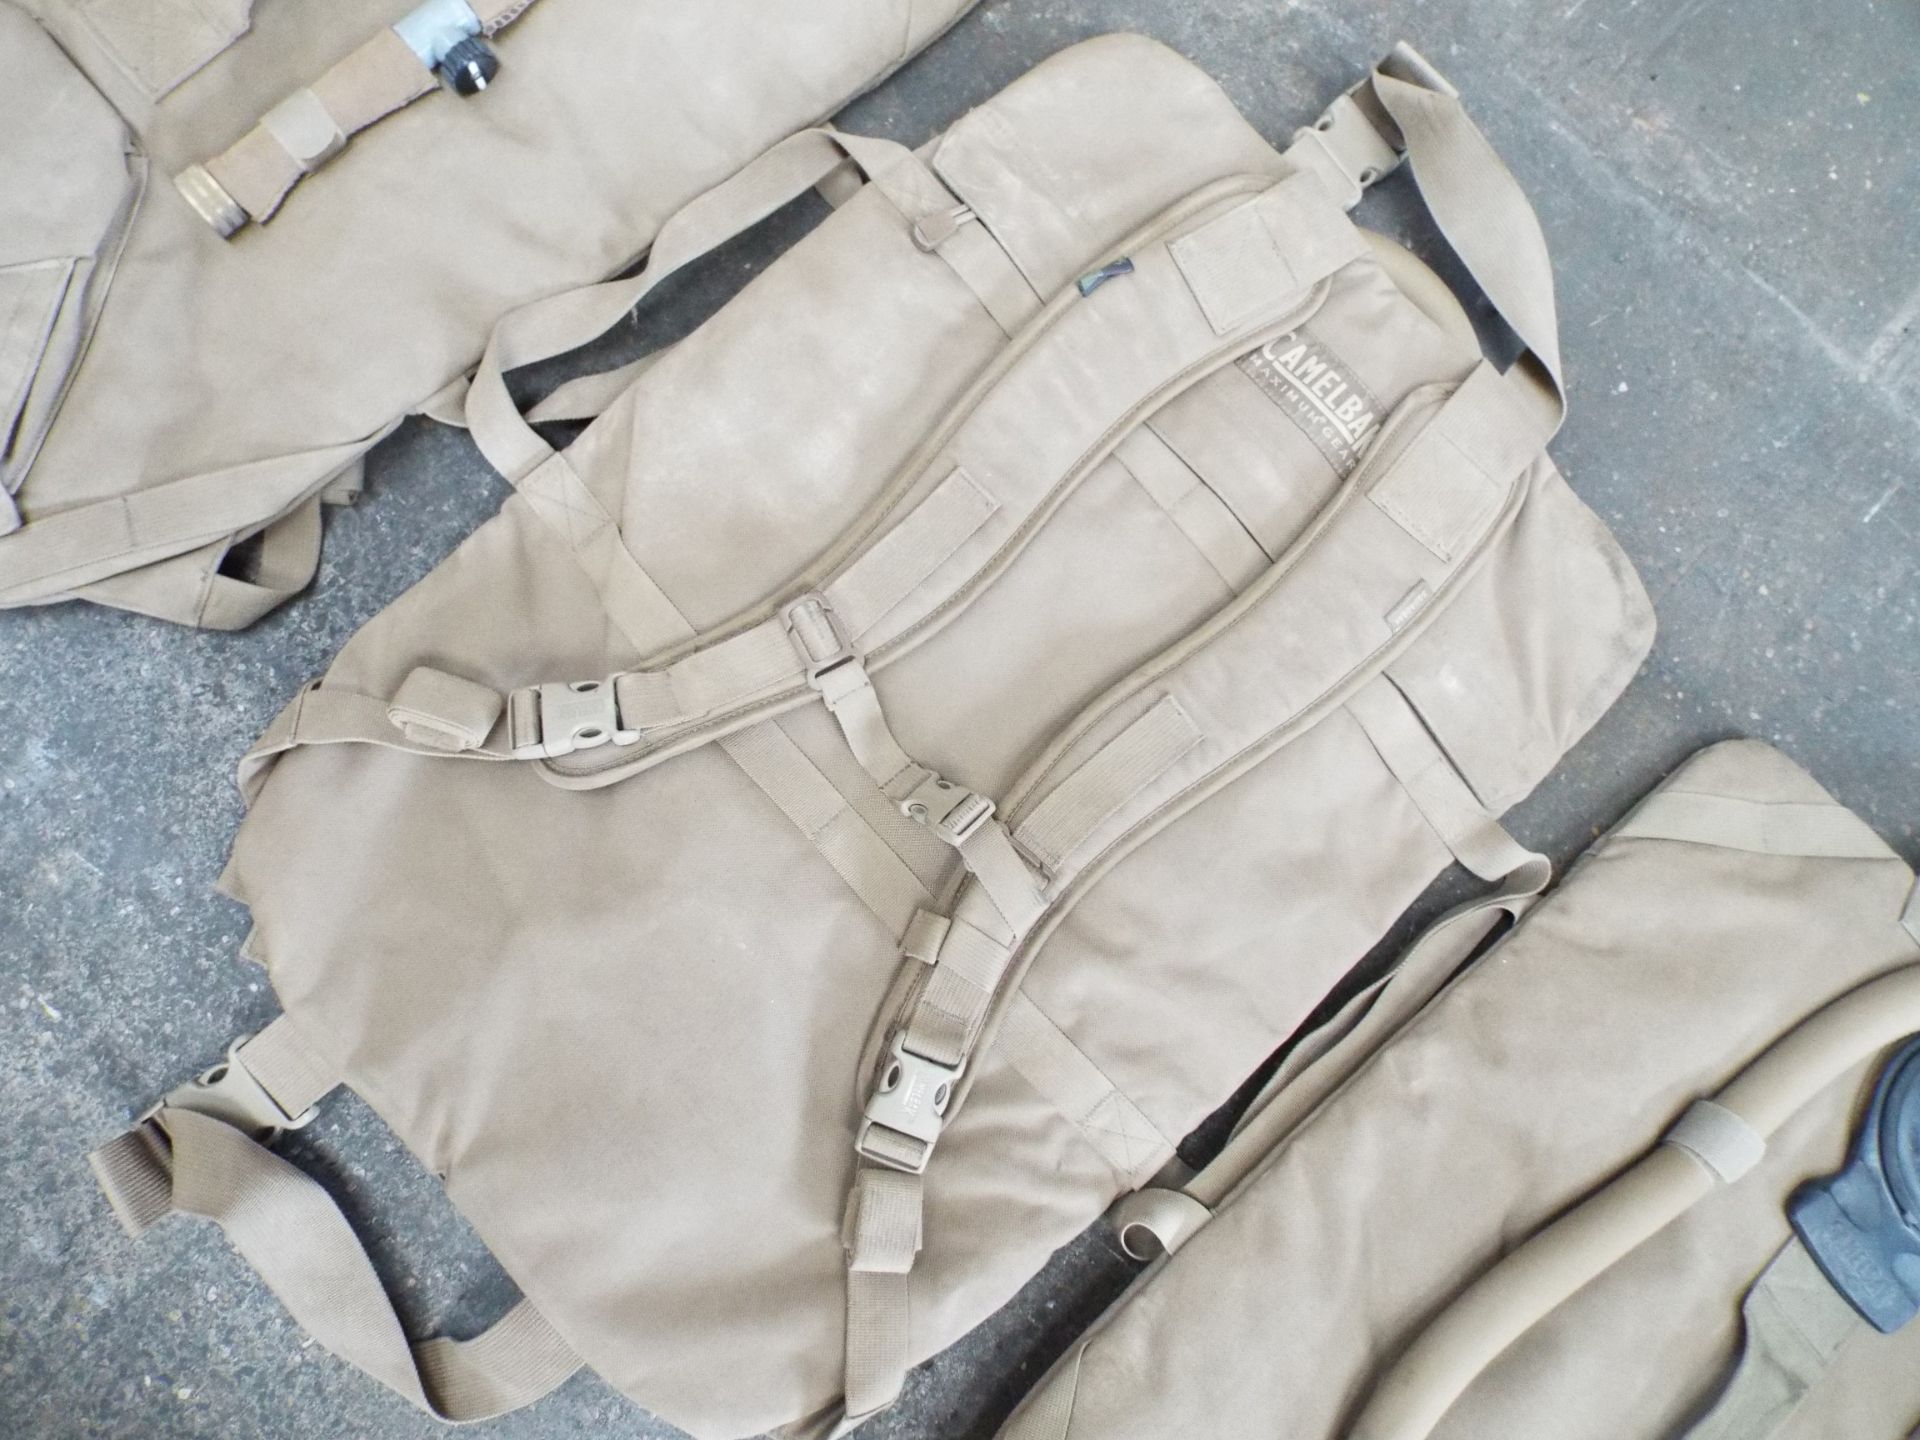 3 x Camelbak Military Hydration Backpack - Image 3 of 4